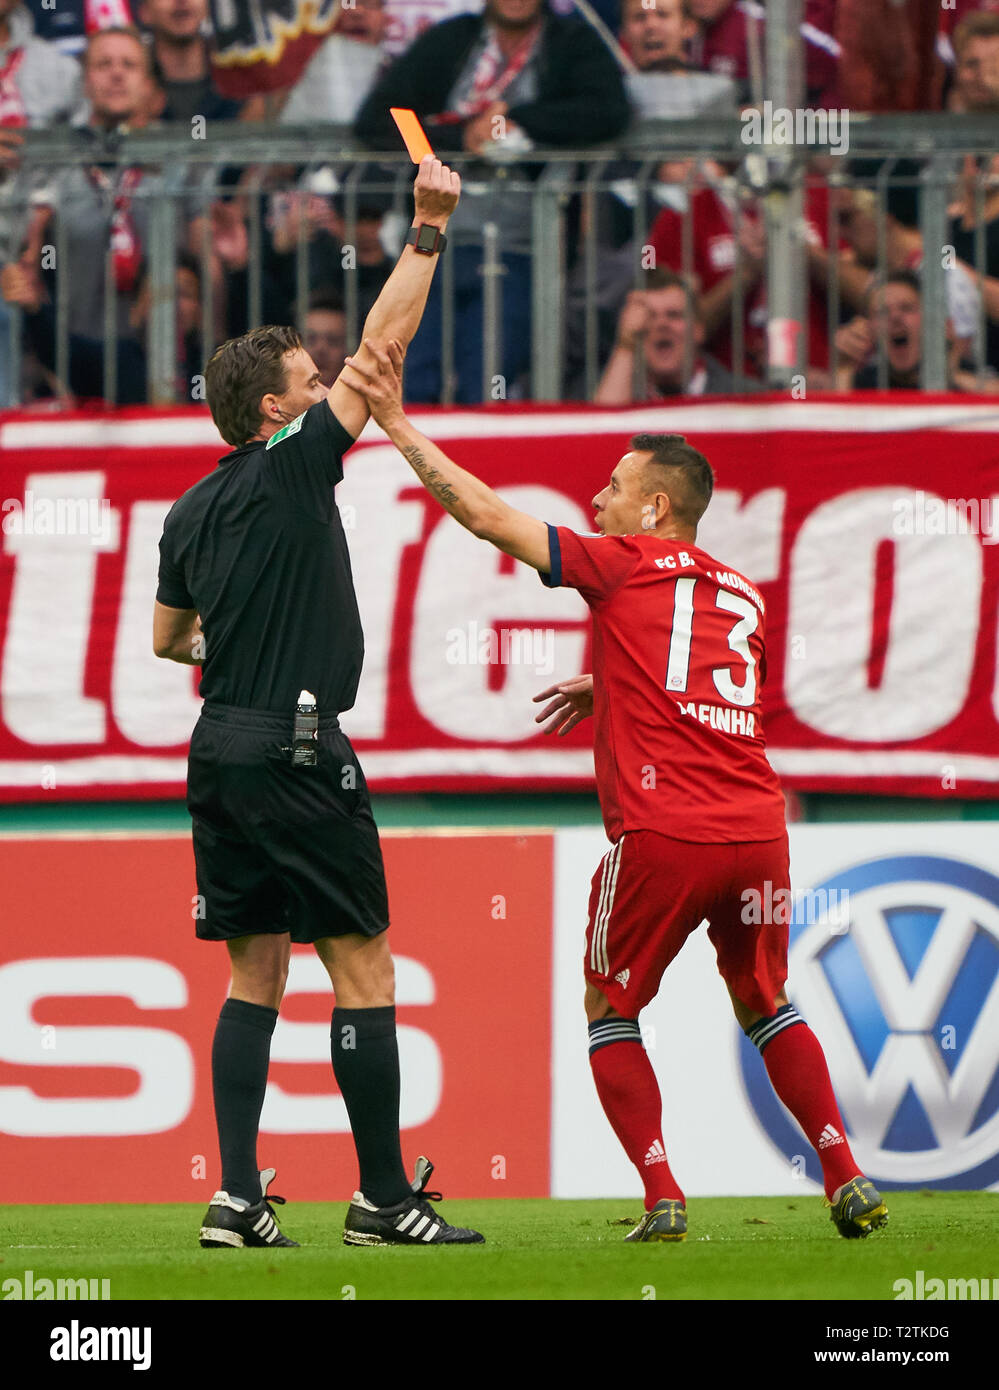 Munich, Germany. 03rd Apr, 2019. Referee Guido WINKMANN with whistle,  gestures, shows, watch, individual action, shows red card to Niklas SUELE,  FCB 4 after Video assist, videorecord, videoreferee, videotape, sign, hand  to